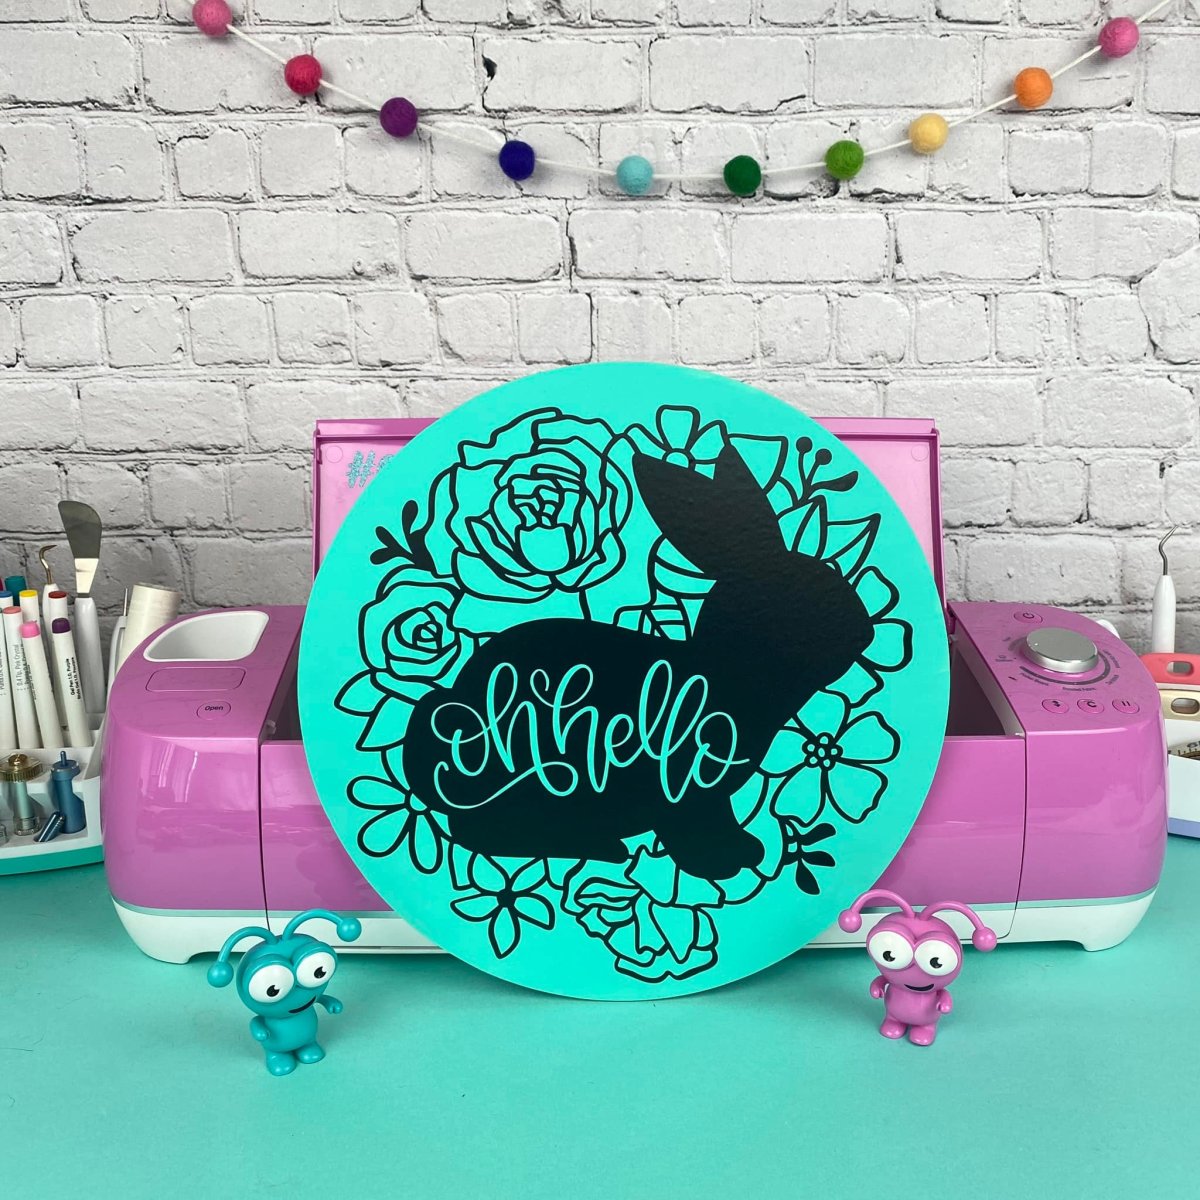 Use slice in Cricut Design Space to Make A Bunny Door Sign